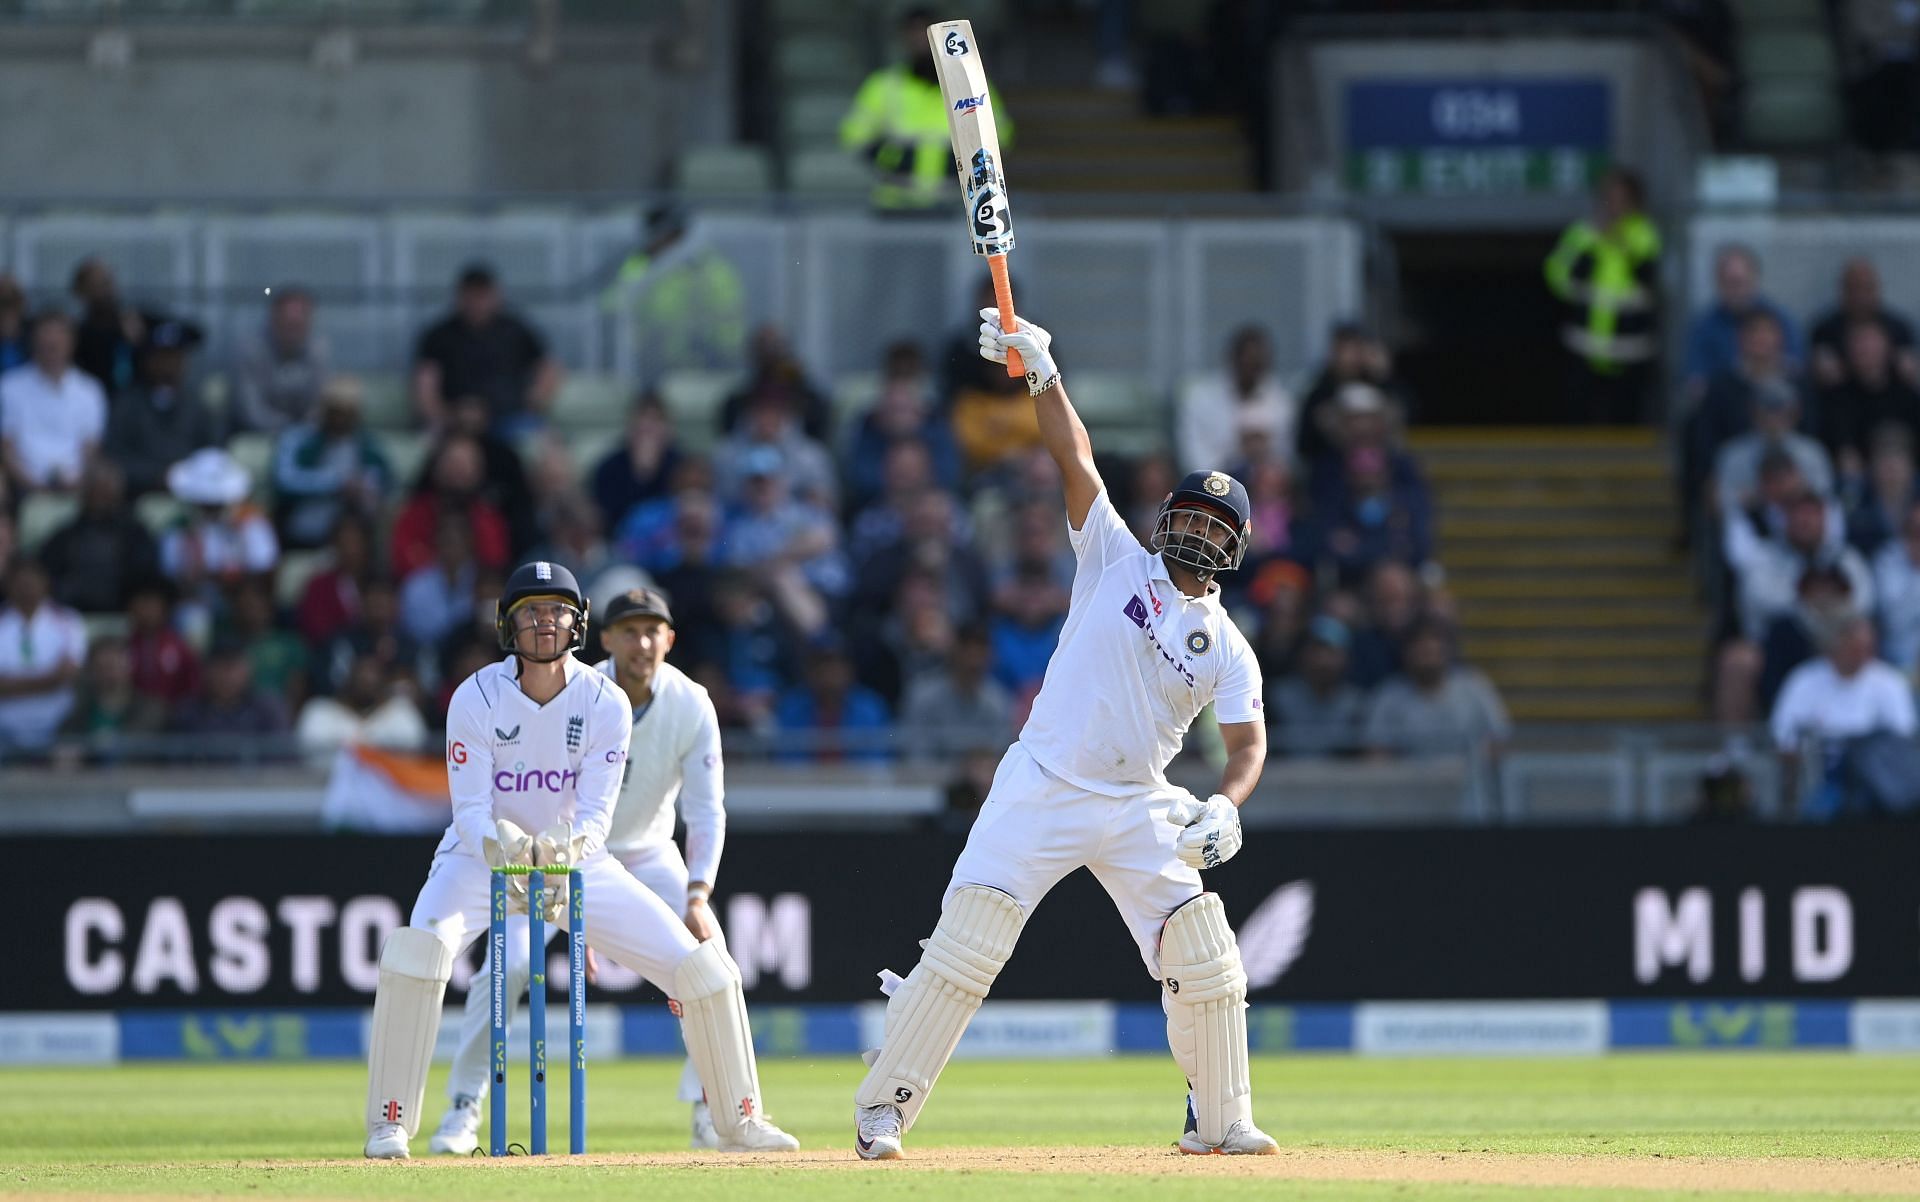 The keeper-batter scored a sensational hundred in Birmingham. Pic: Getty Images